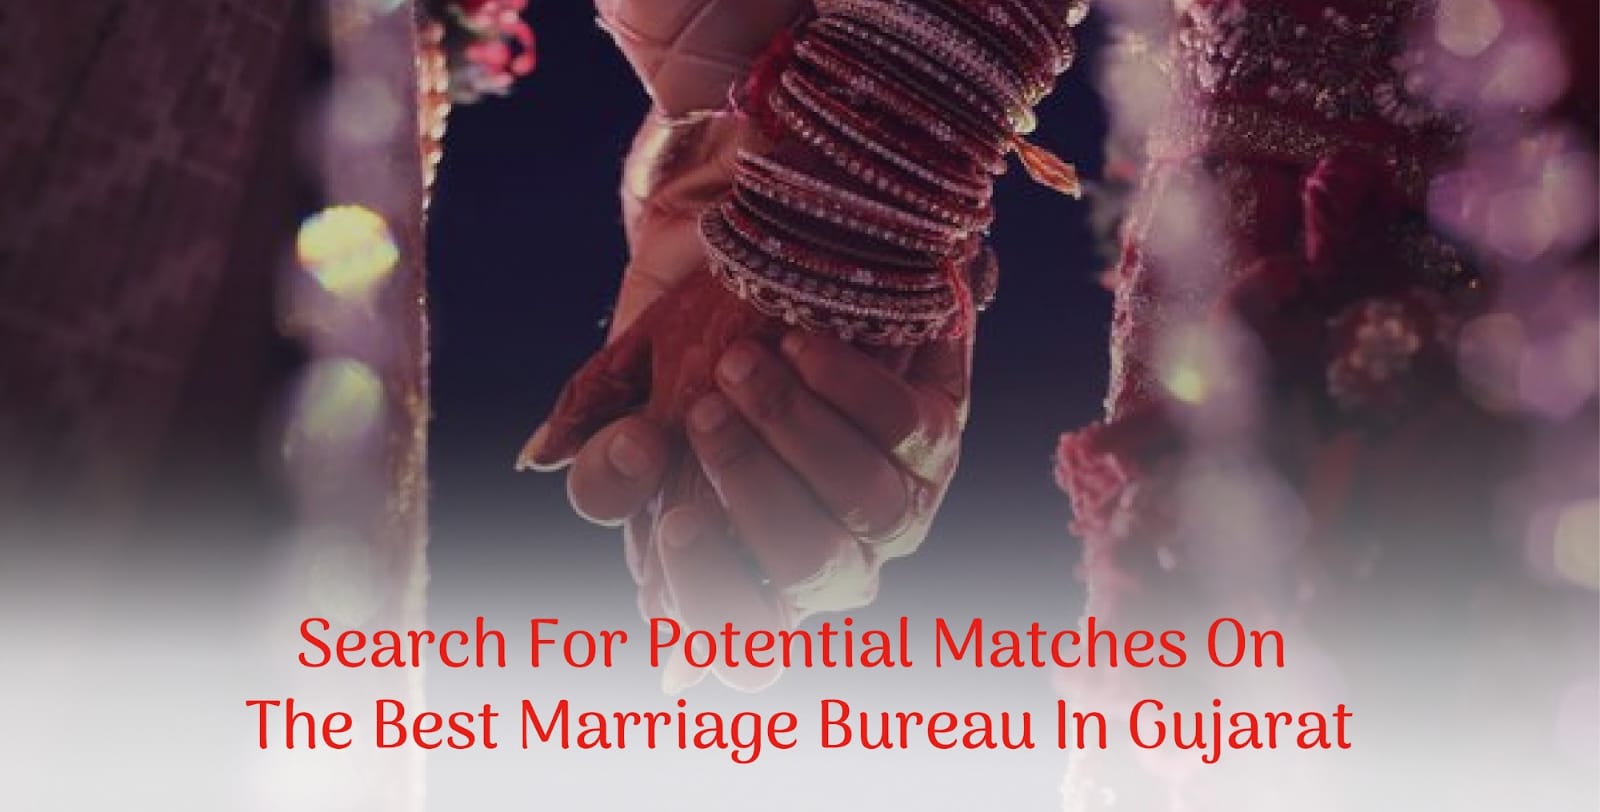 Search For Potential Matches On The Best Marriage Bureau In Gujarat